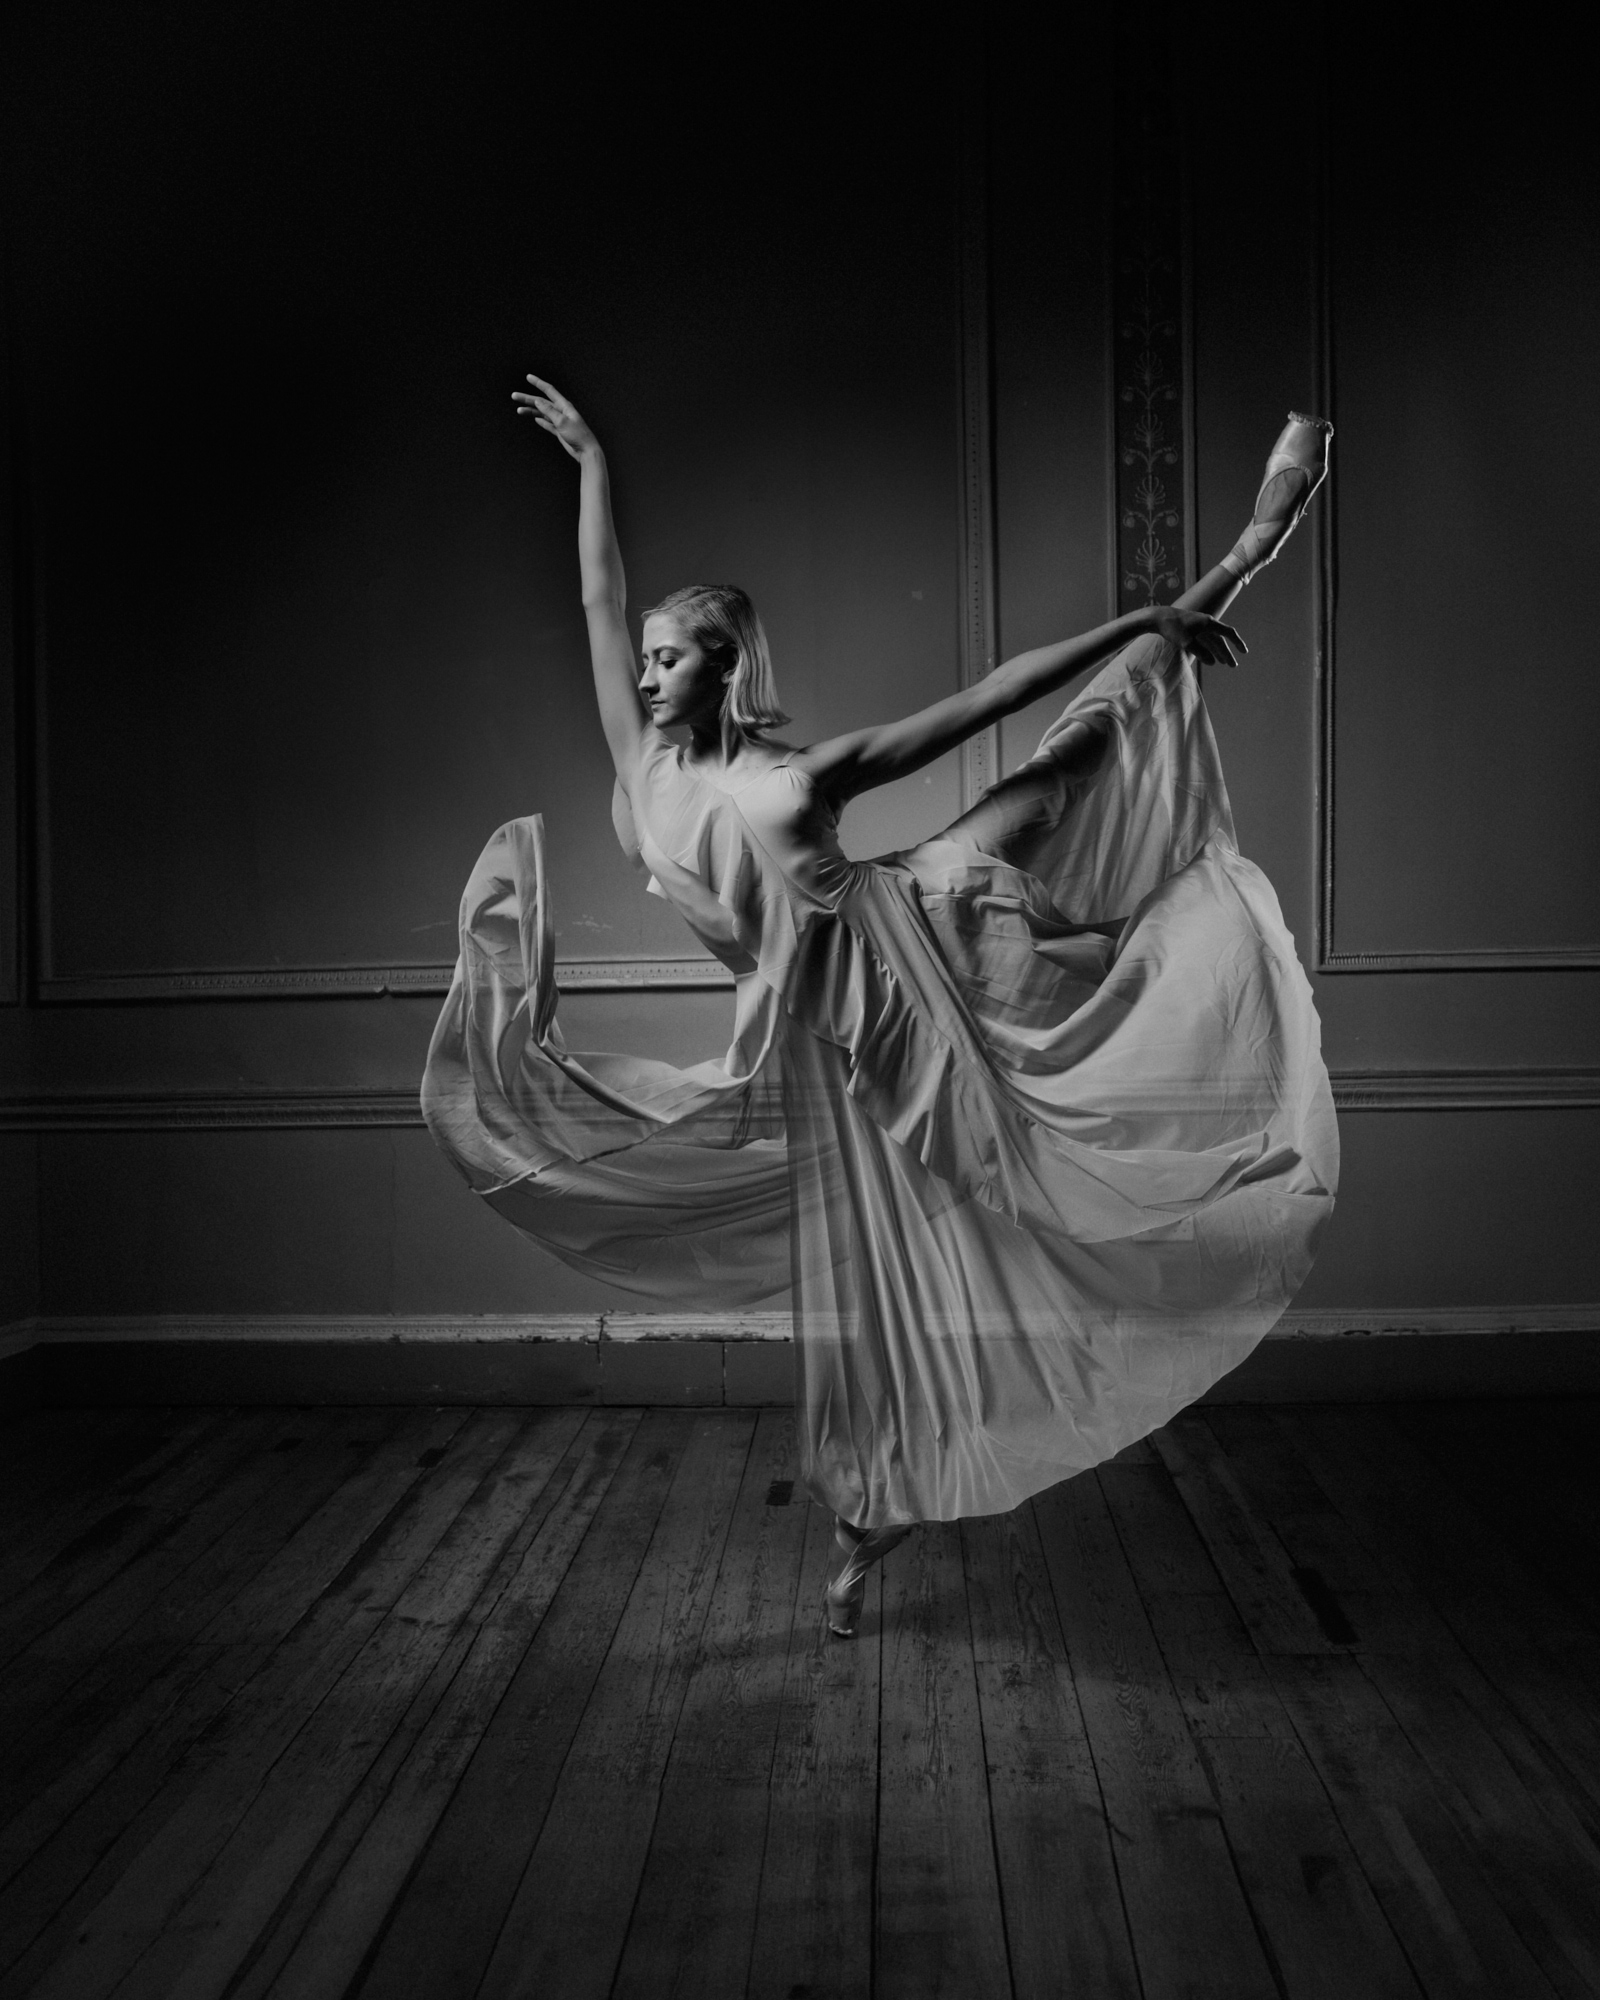 Surrey dancer in demi pointe with long flowing fabric